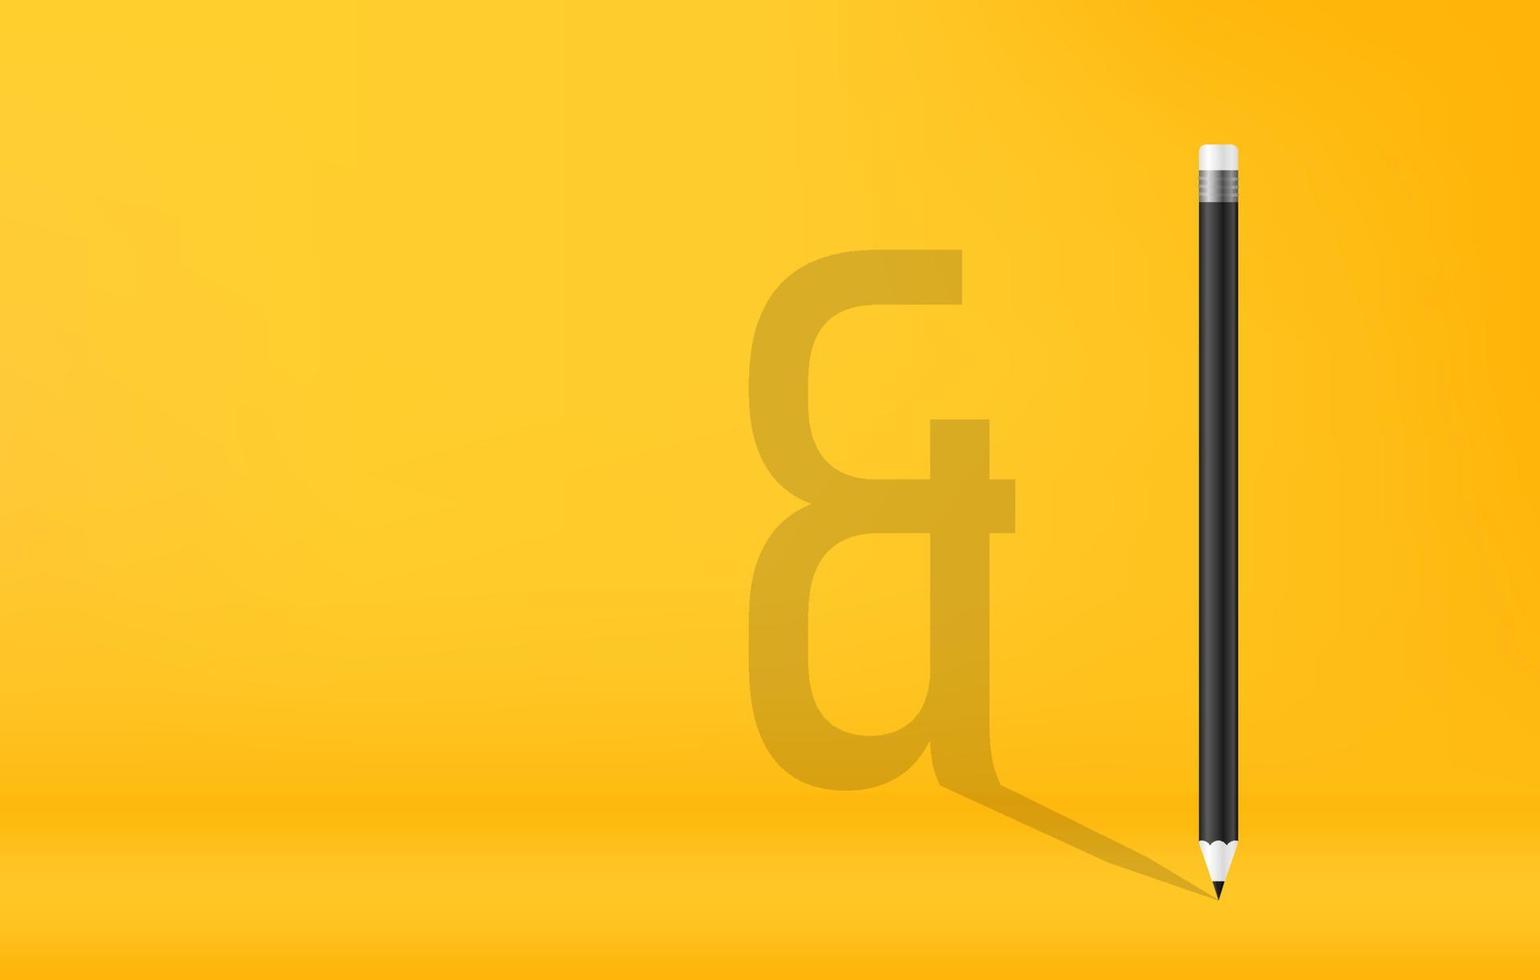 Pencils with ampersand symbol shadow on yellow background vector